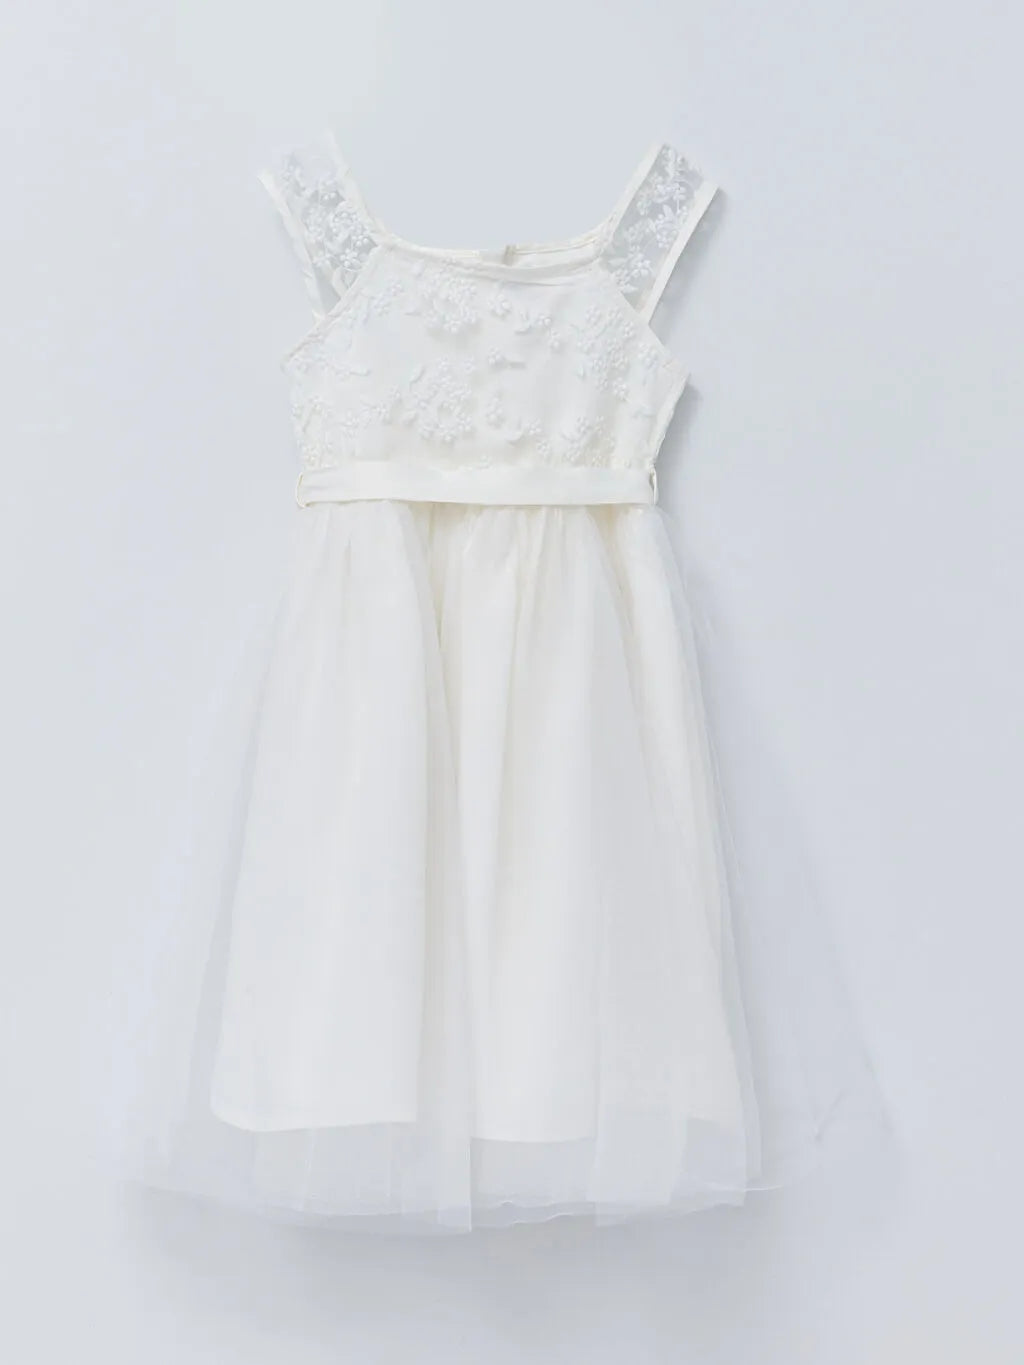 Square Collar Embroidery Detailed Girl Dress